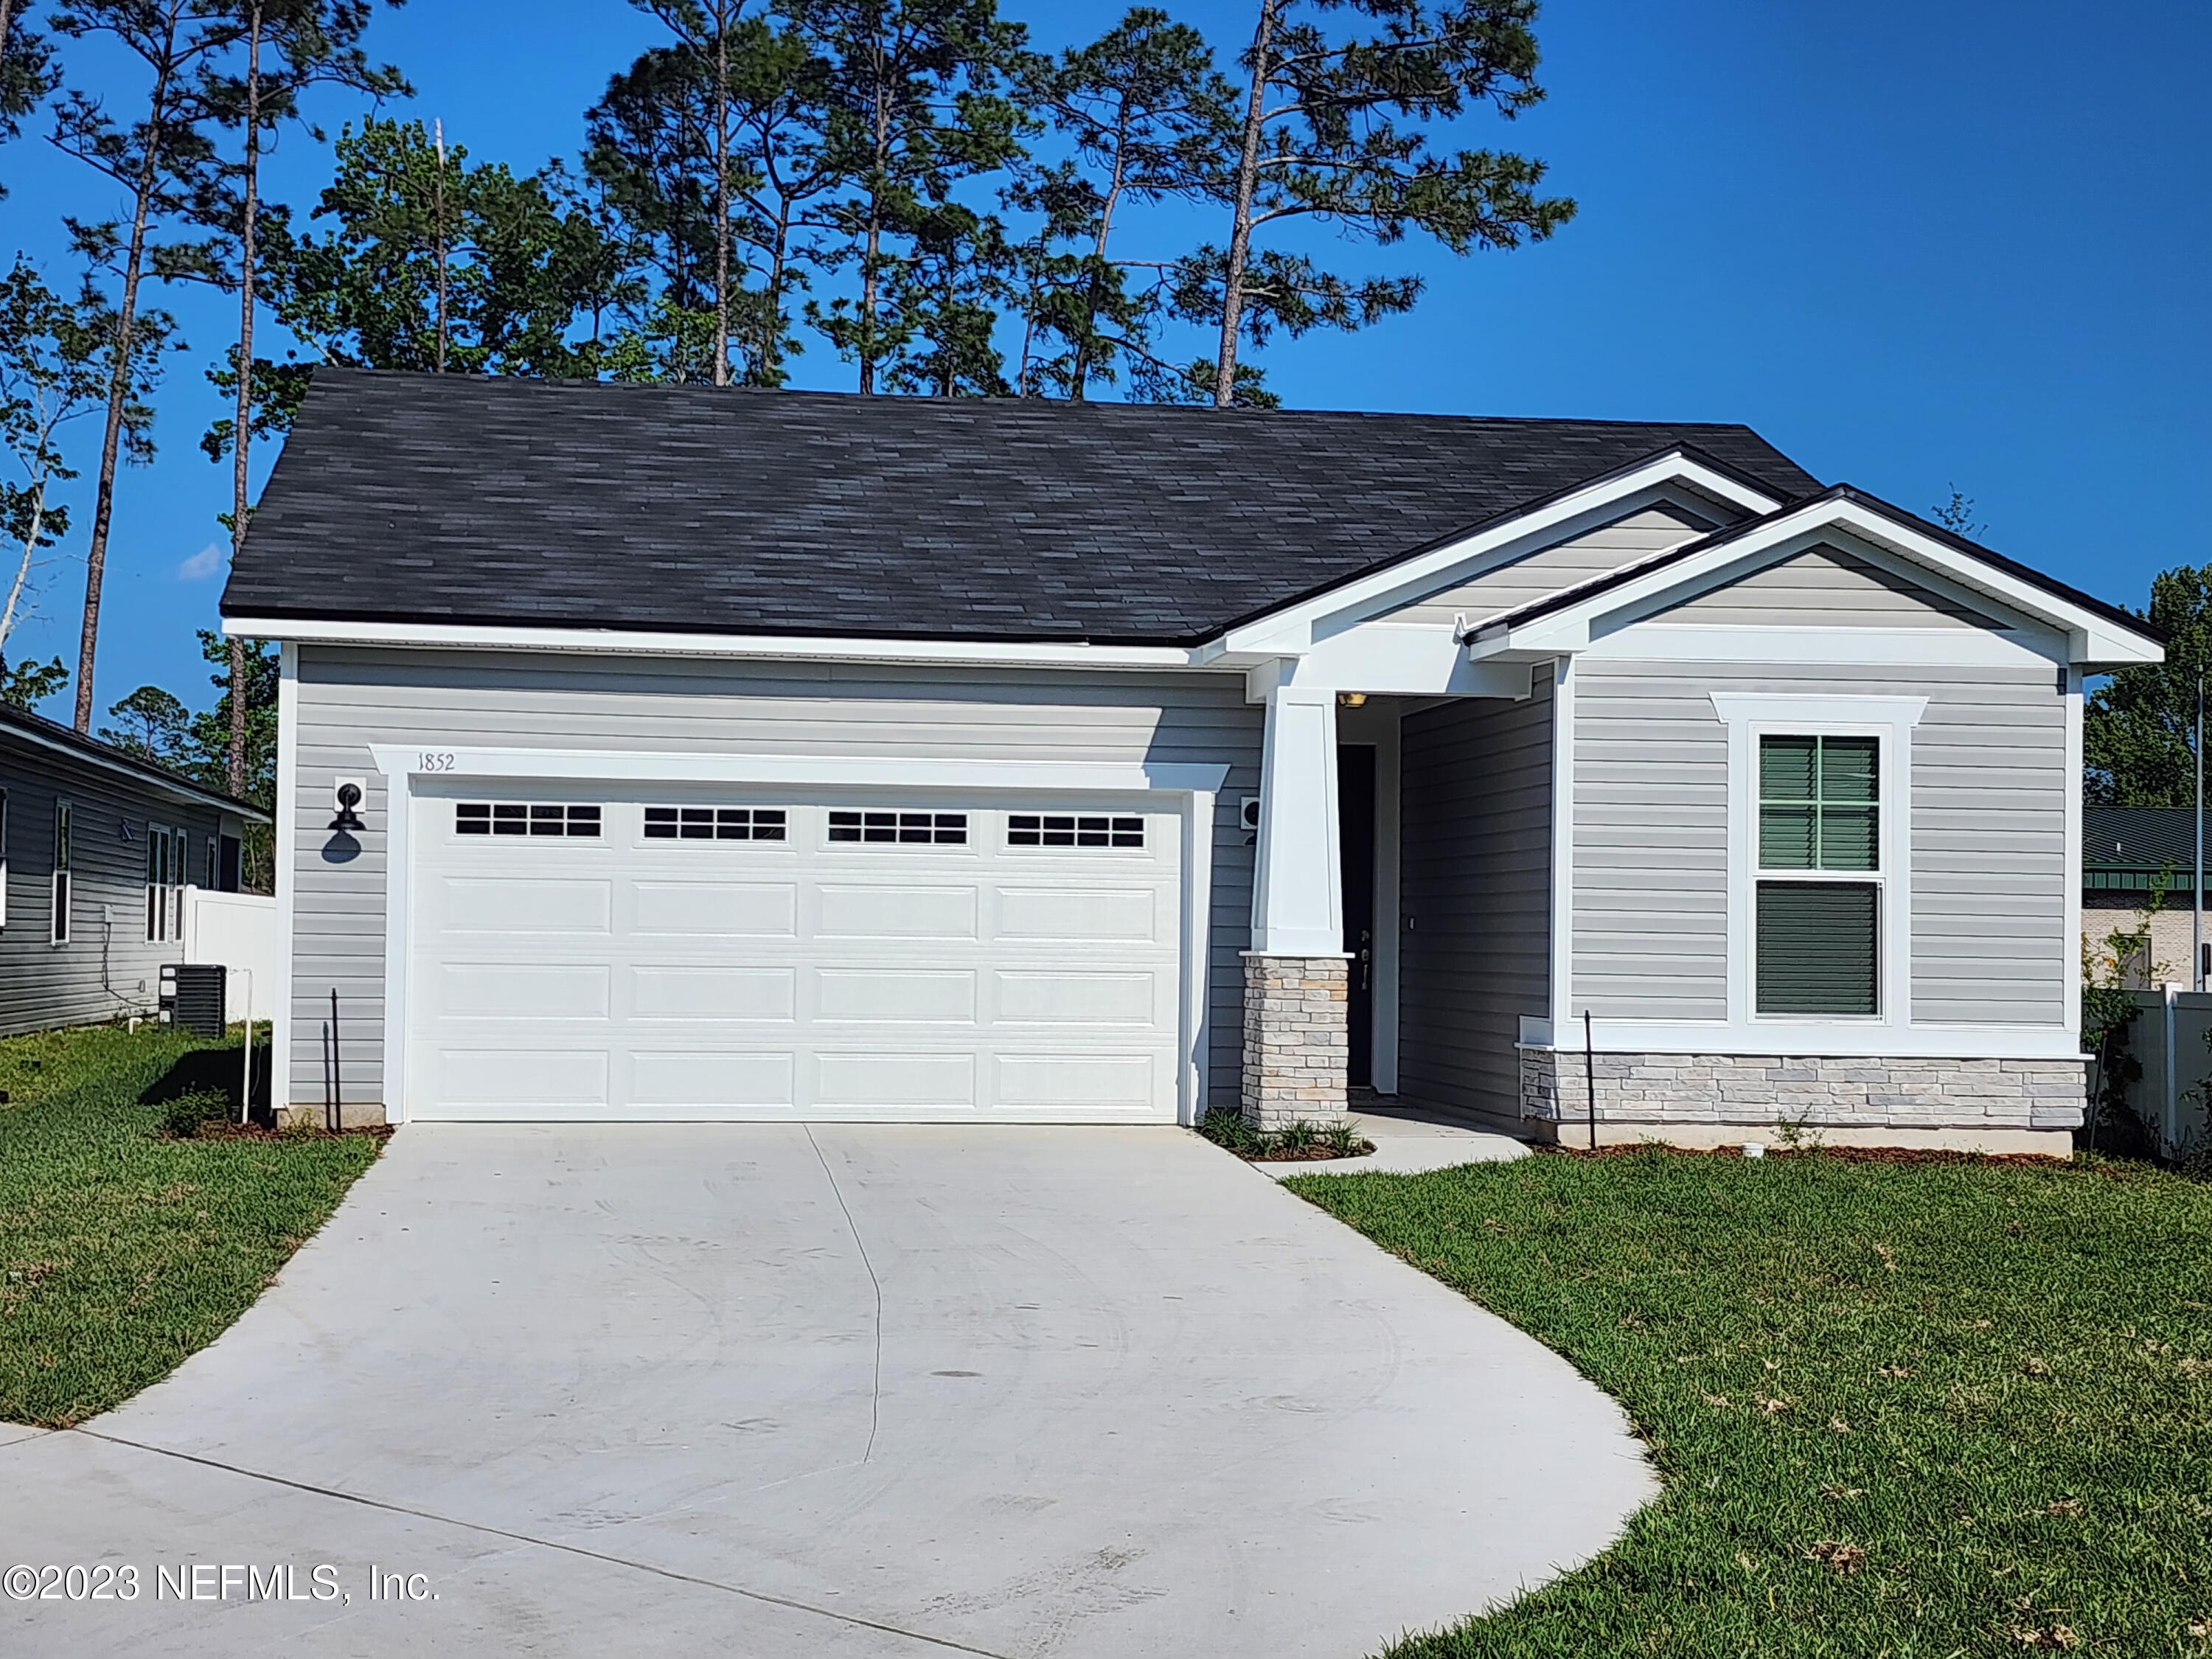 Middleburg, FL home for sale located at 1852 Cogdill Trace, Middleburg, FL 32068